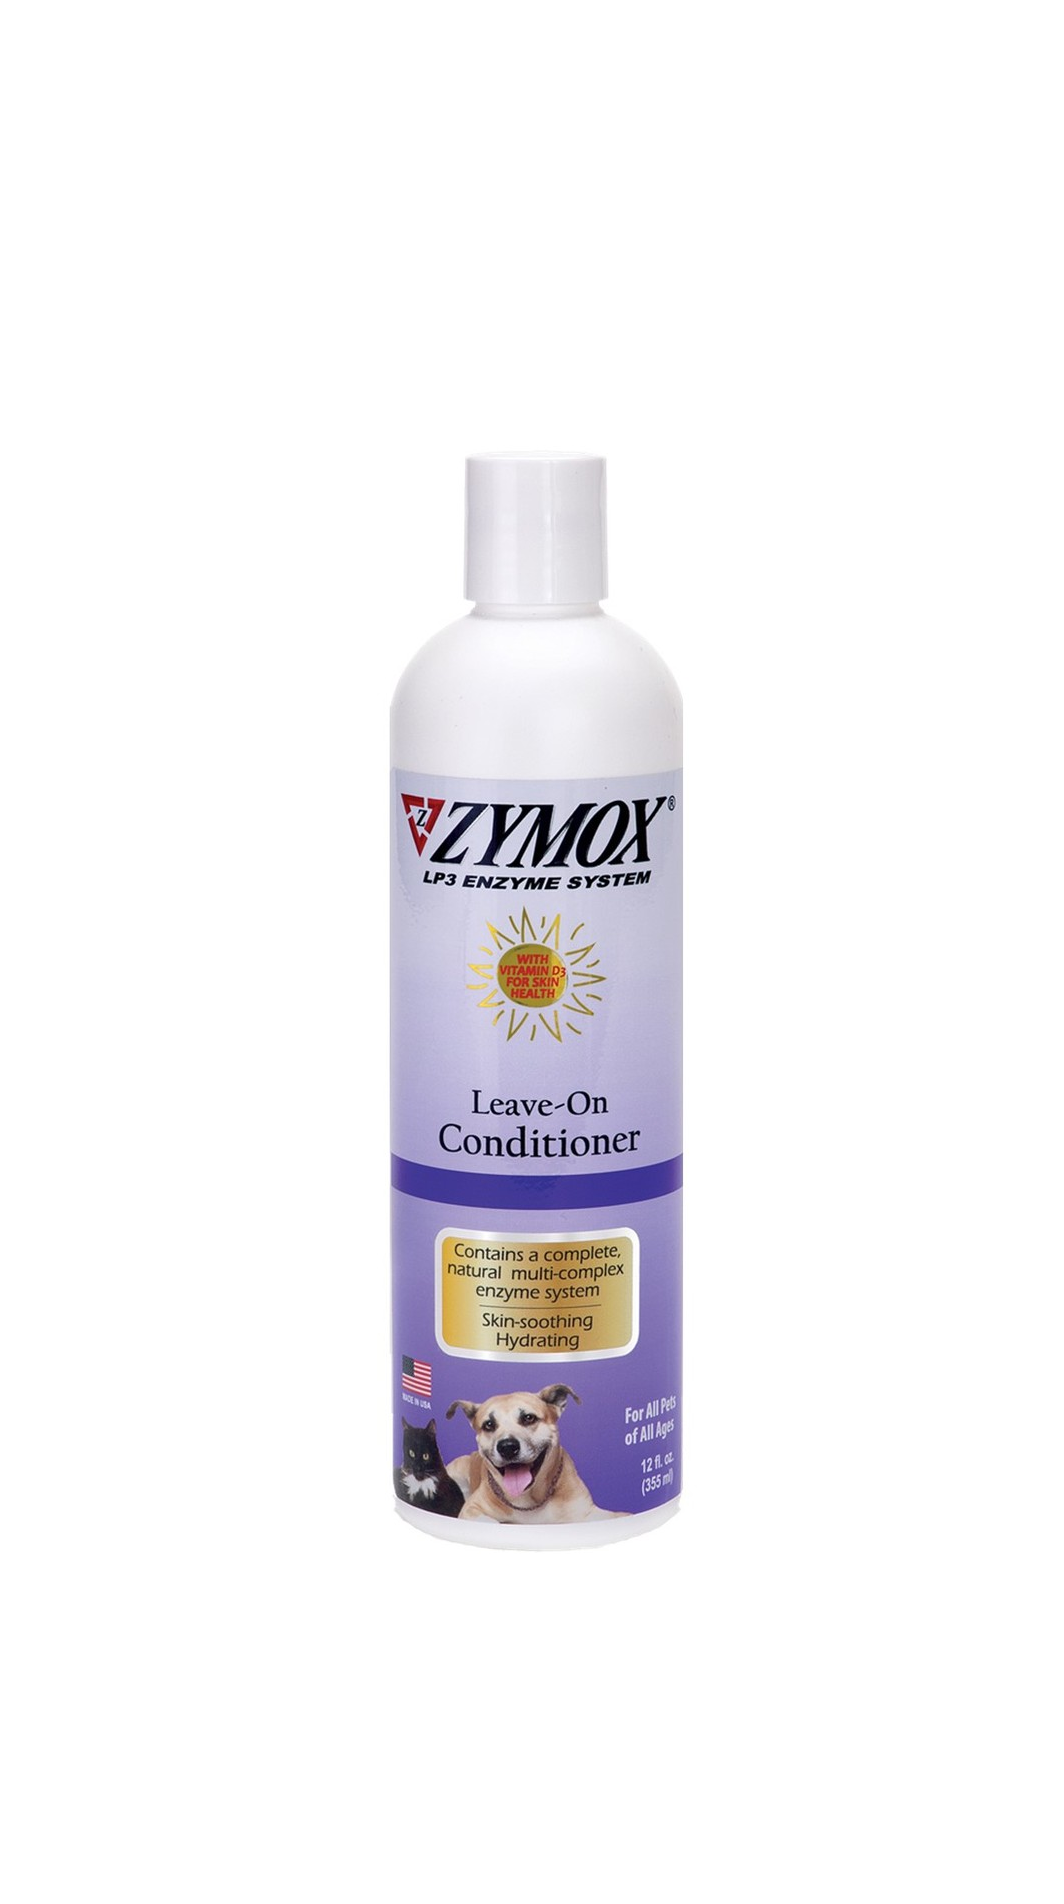 Zymox Enzymatic Leave-On Conditioner with Vitamin D3